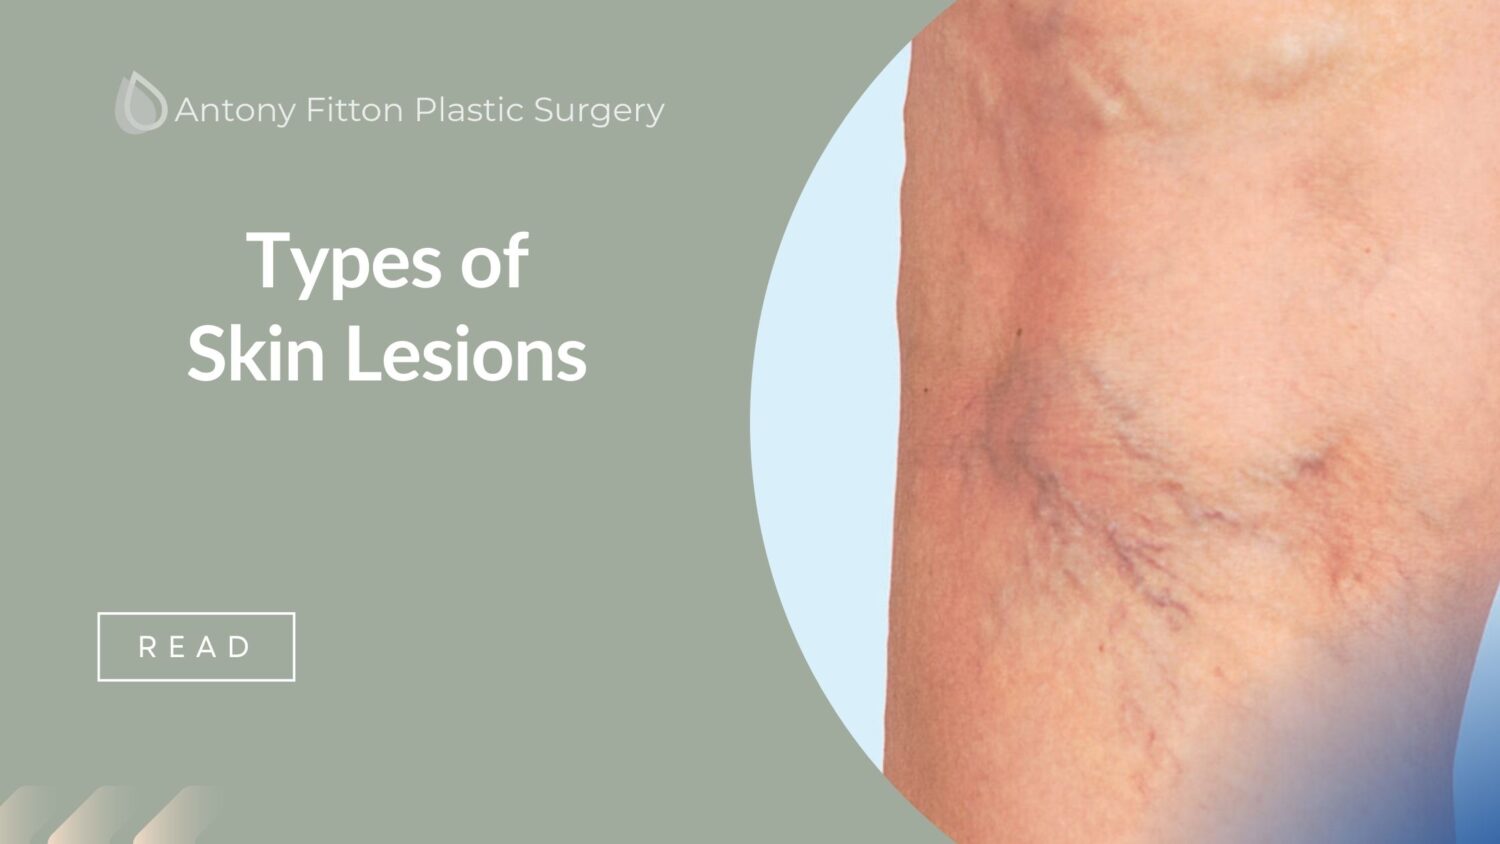 Types of Skin Lesions | Antony Fitton Plastic Surgery Plymouth & Truro